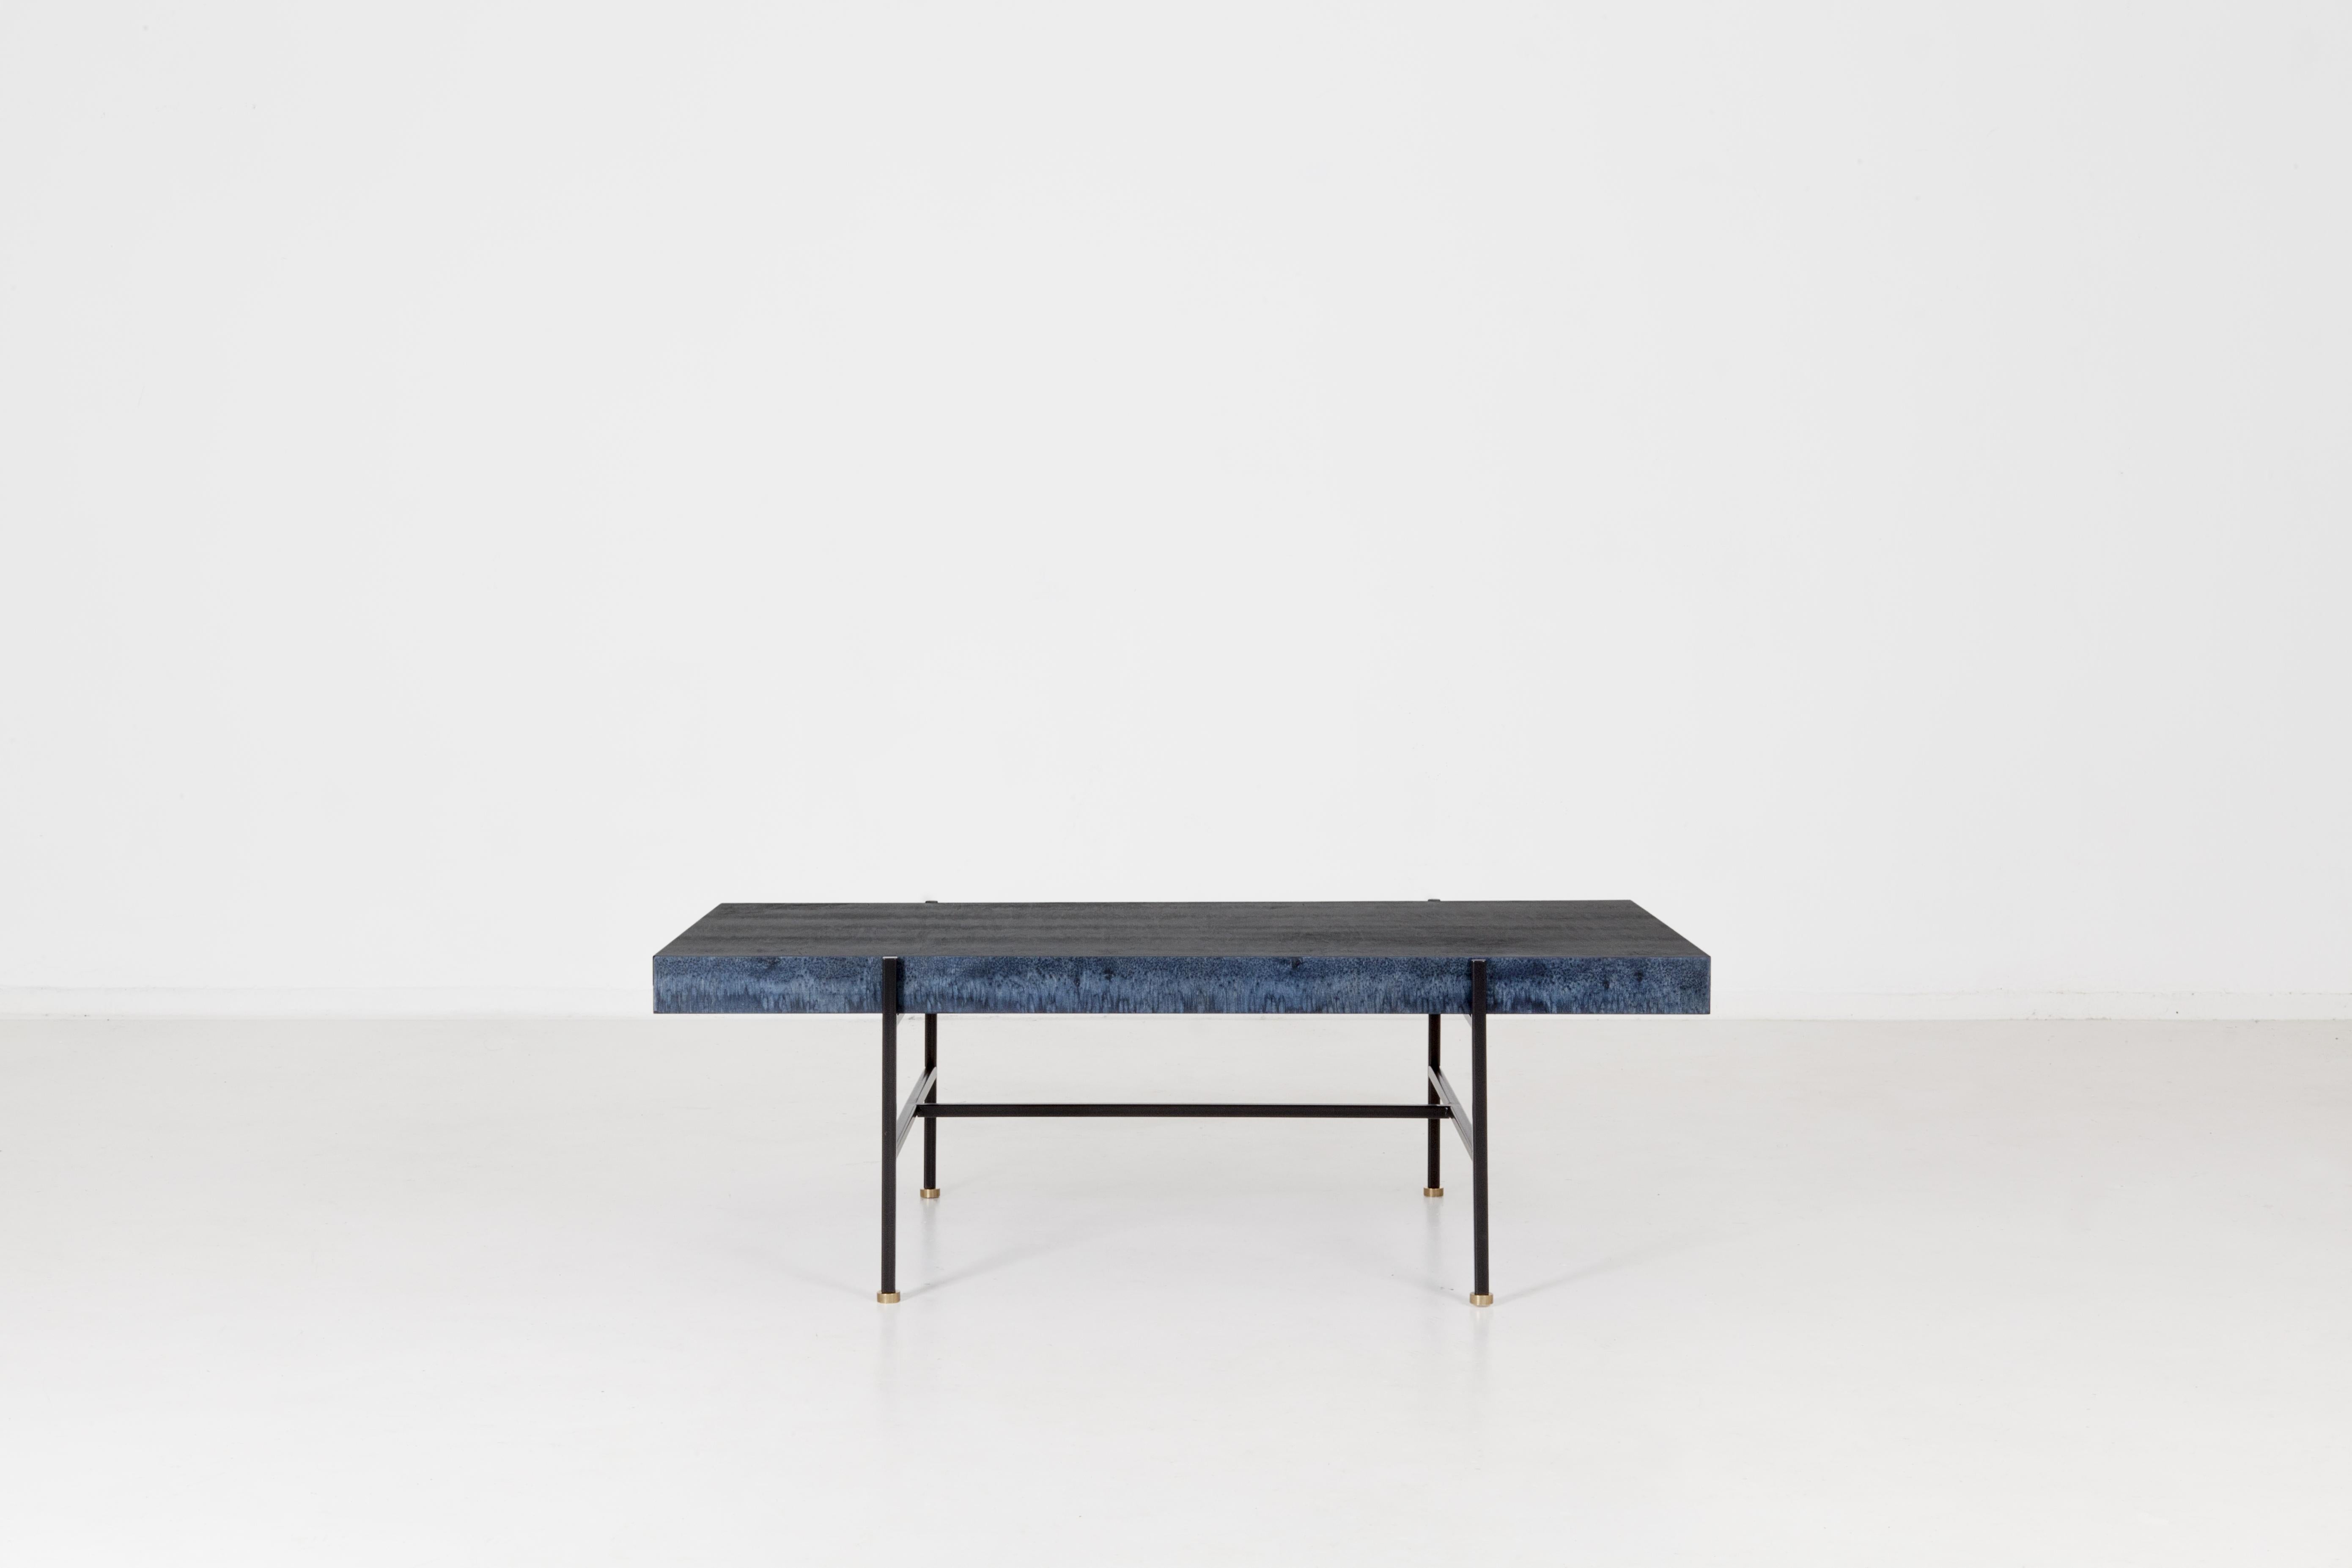 Blue Osis Bensimon low table by Llot Llov
Dimensions: H 40 x L 160 x W 80 cm
Materials: birch wood laquered / powder coated steel?
Also available in purple.

For Gallery Bensimon, studio llot llov exclusively designed a furniture collection based on